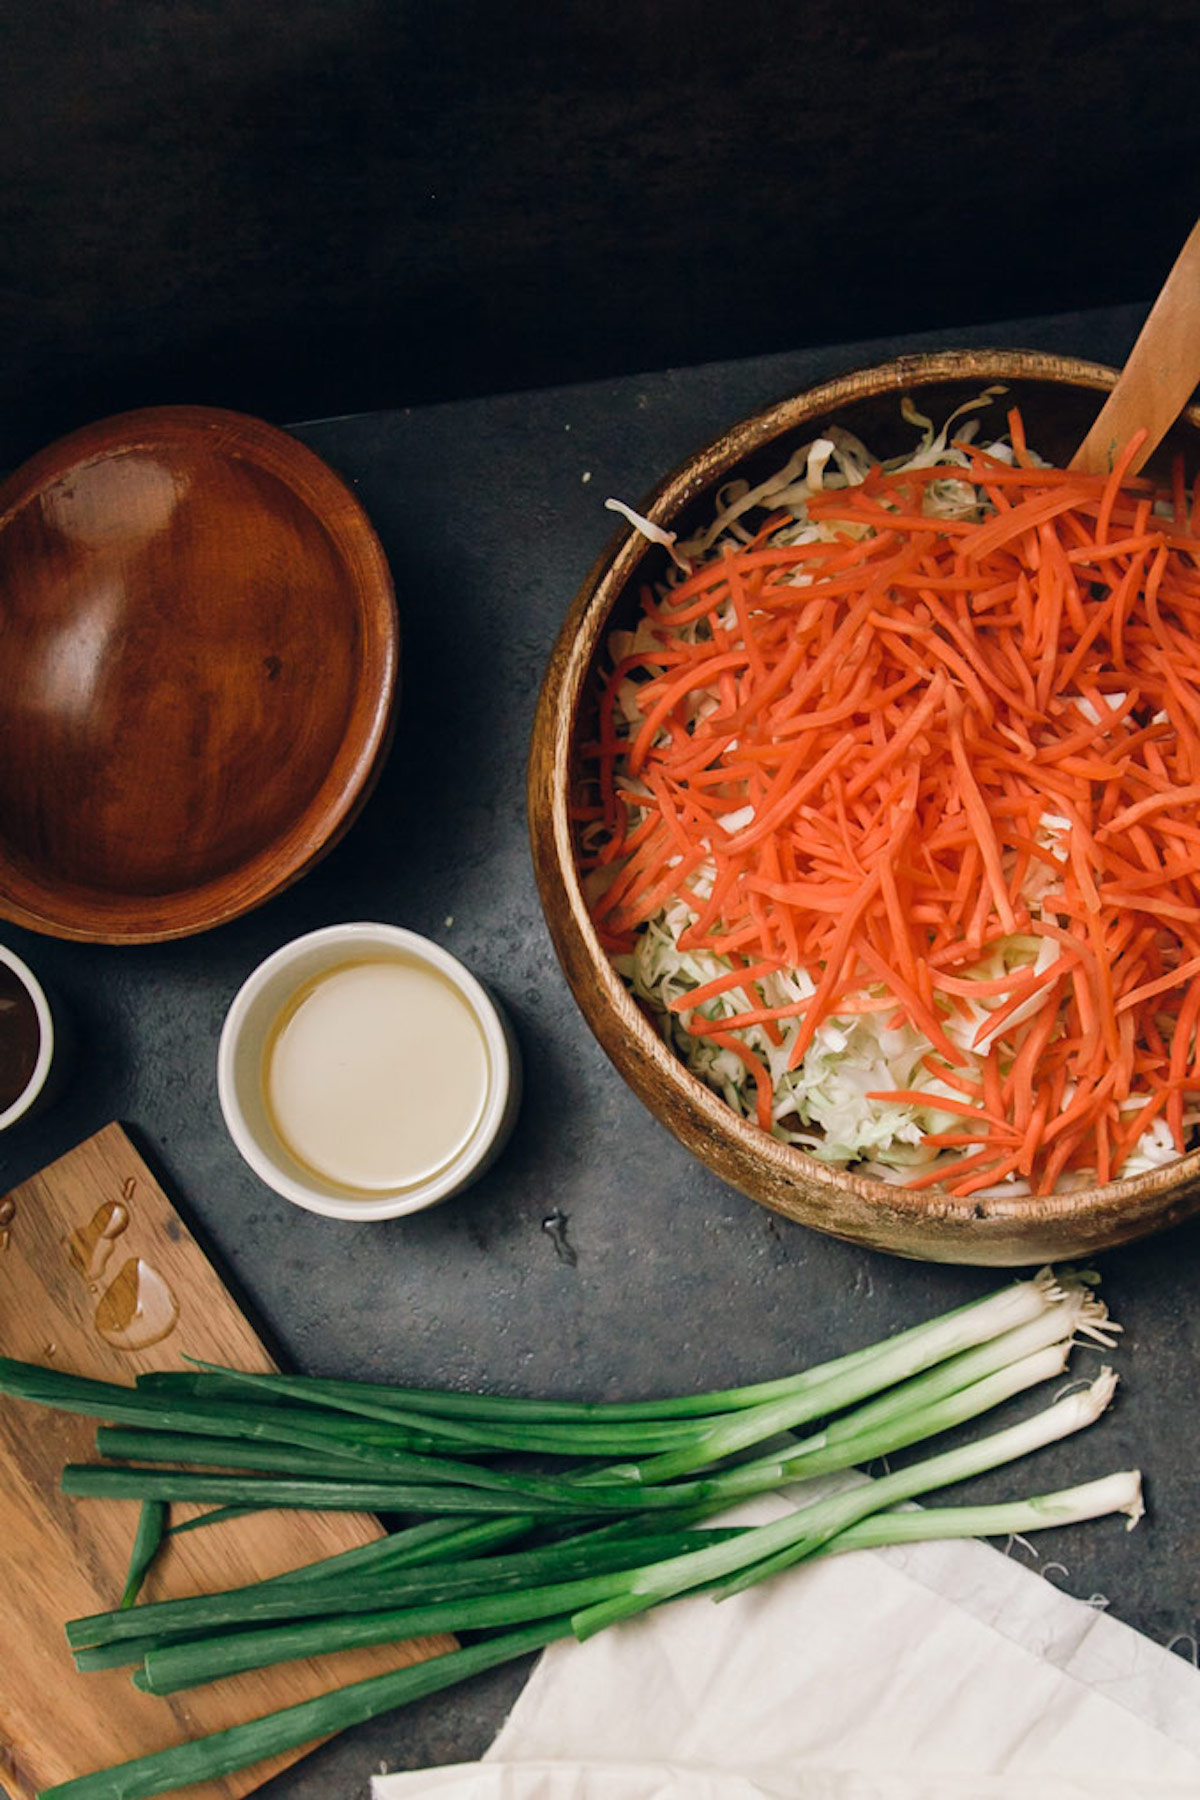 Carrots and cabbage mixed together in a bowl.